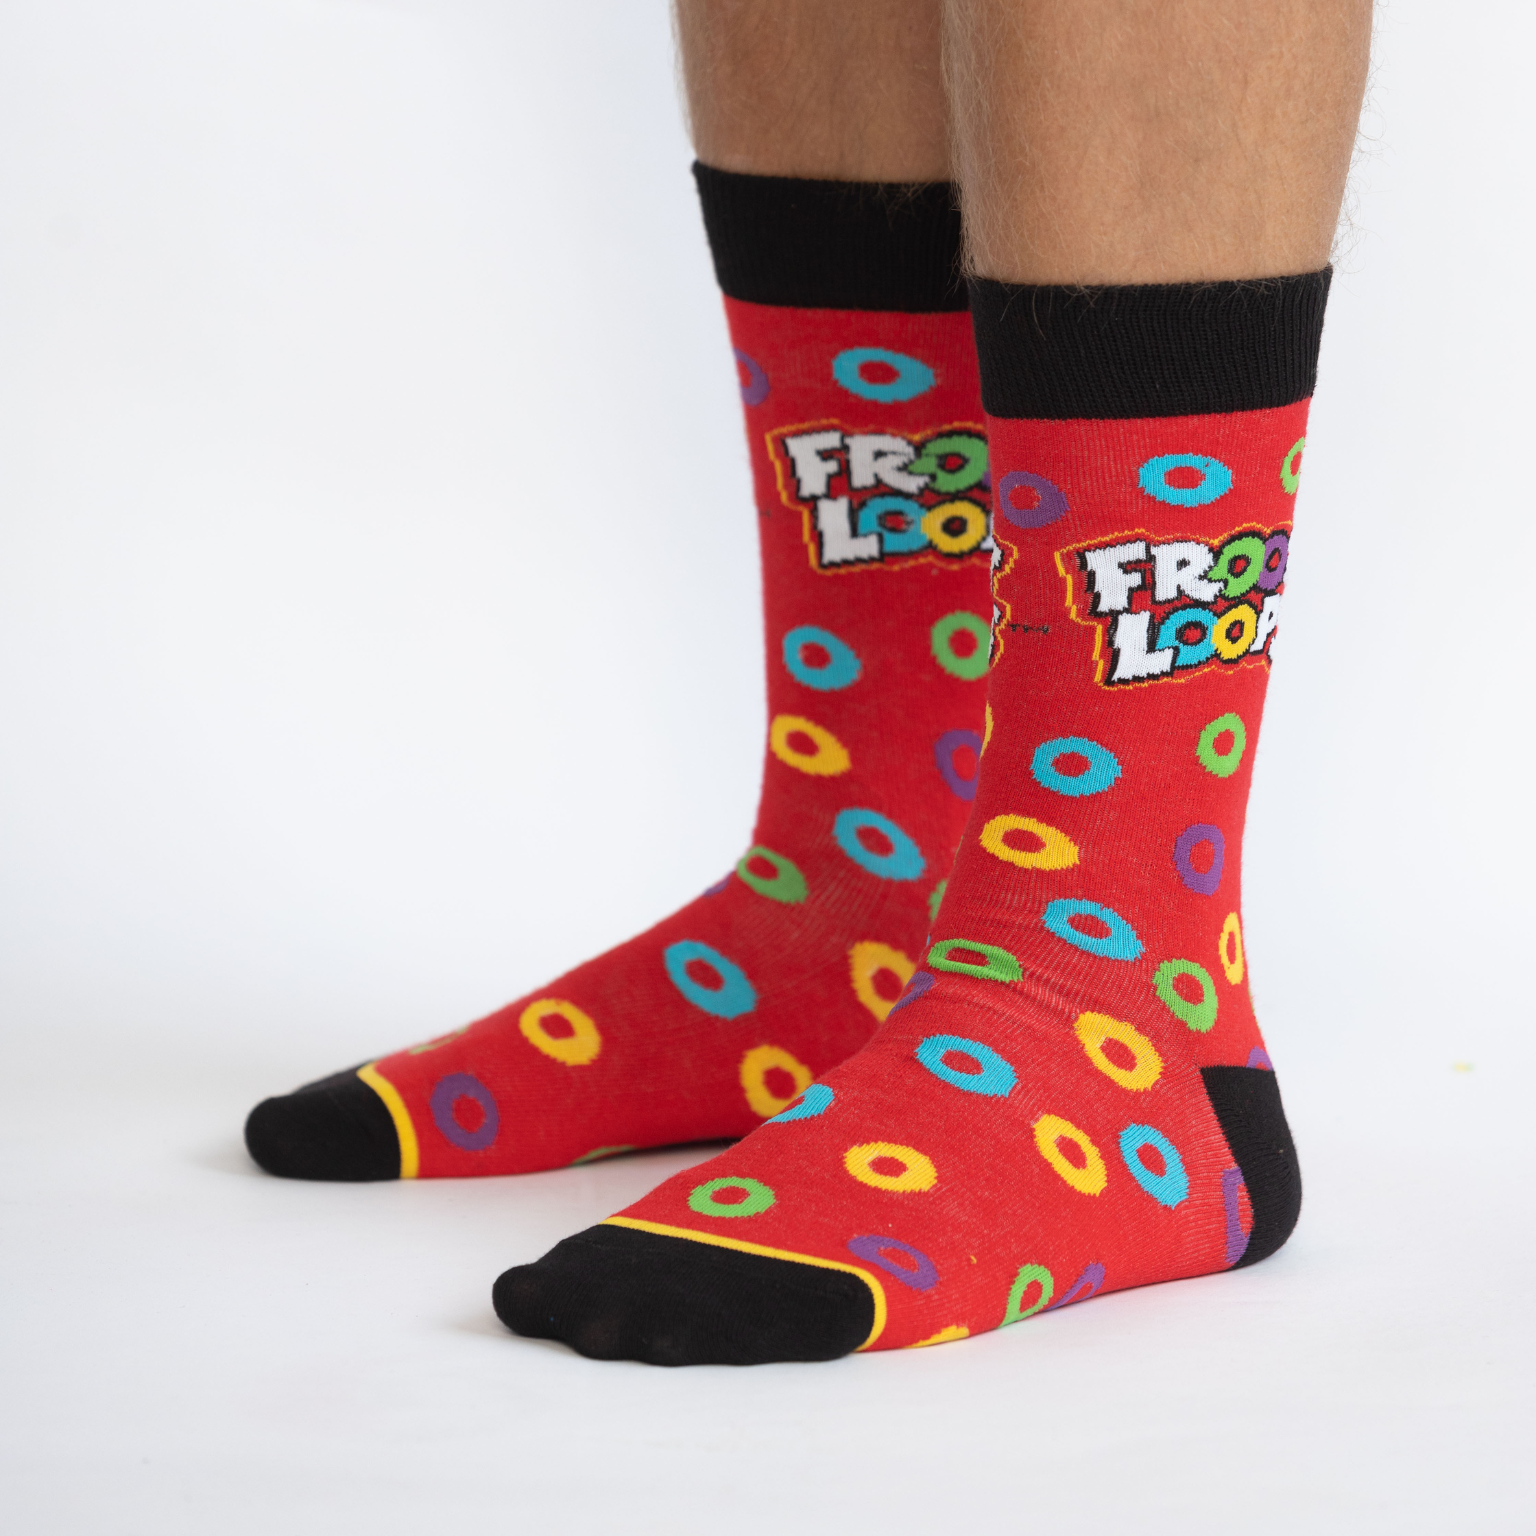 SWAG CEREAL AISLE - FROOT LOOPS SOXERS